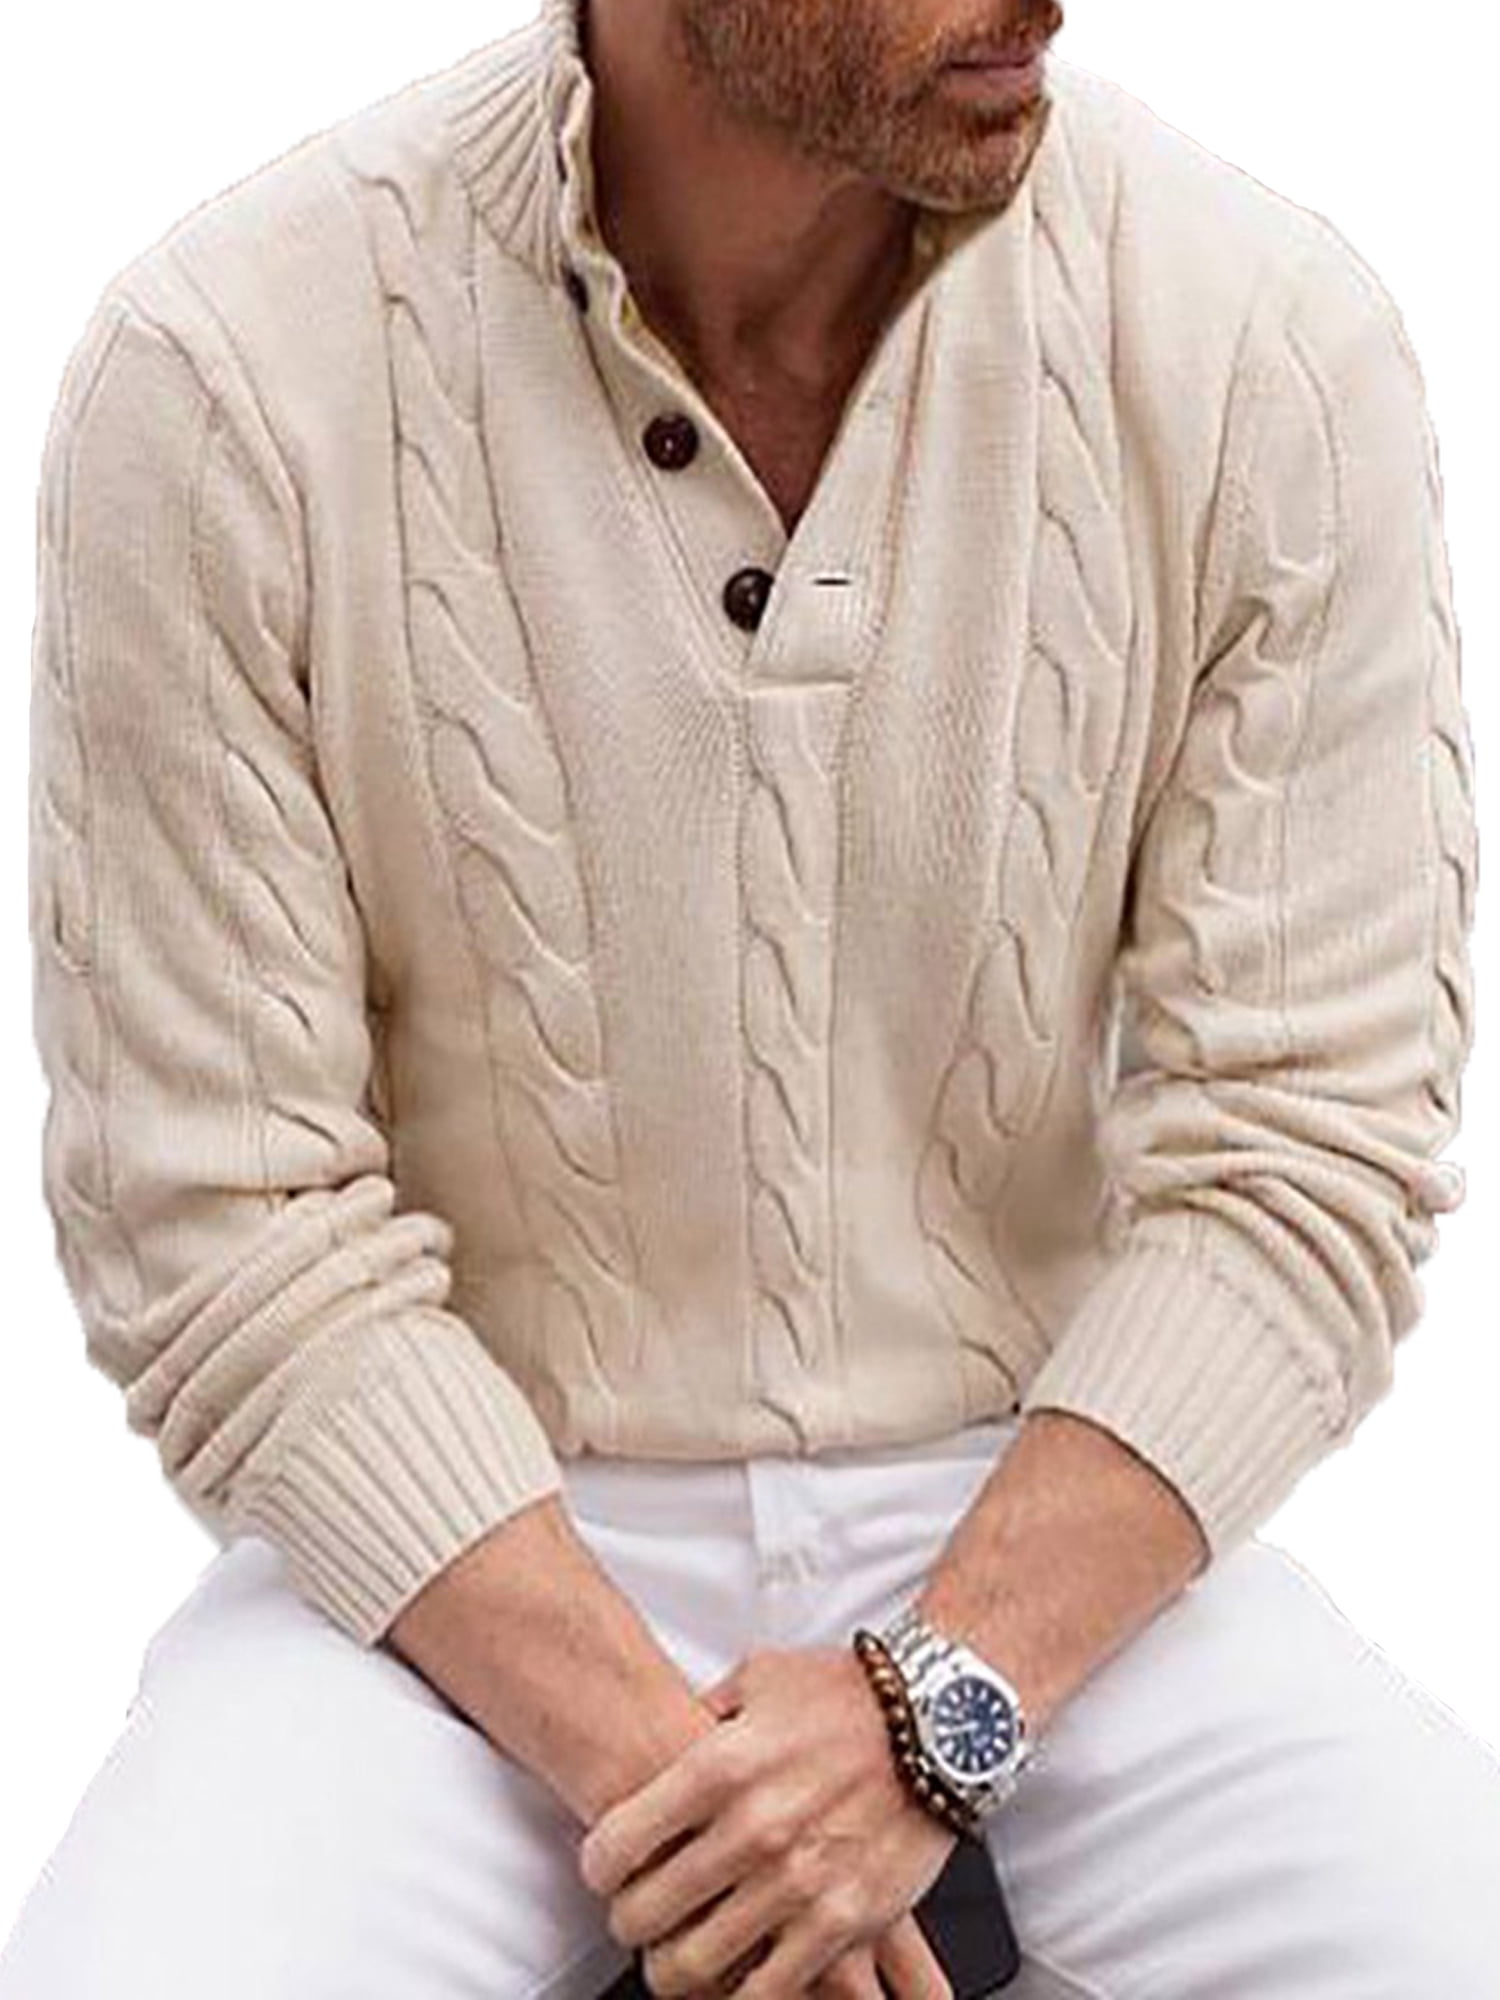 Ukap Ukap Mens Stylish Cable Knitted Sweater Wool Blended Chunky 1 4 Button Casual Loose Pullover Tops Jumper Walmart Com Walmart Com